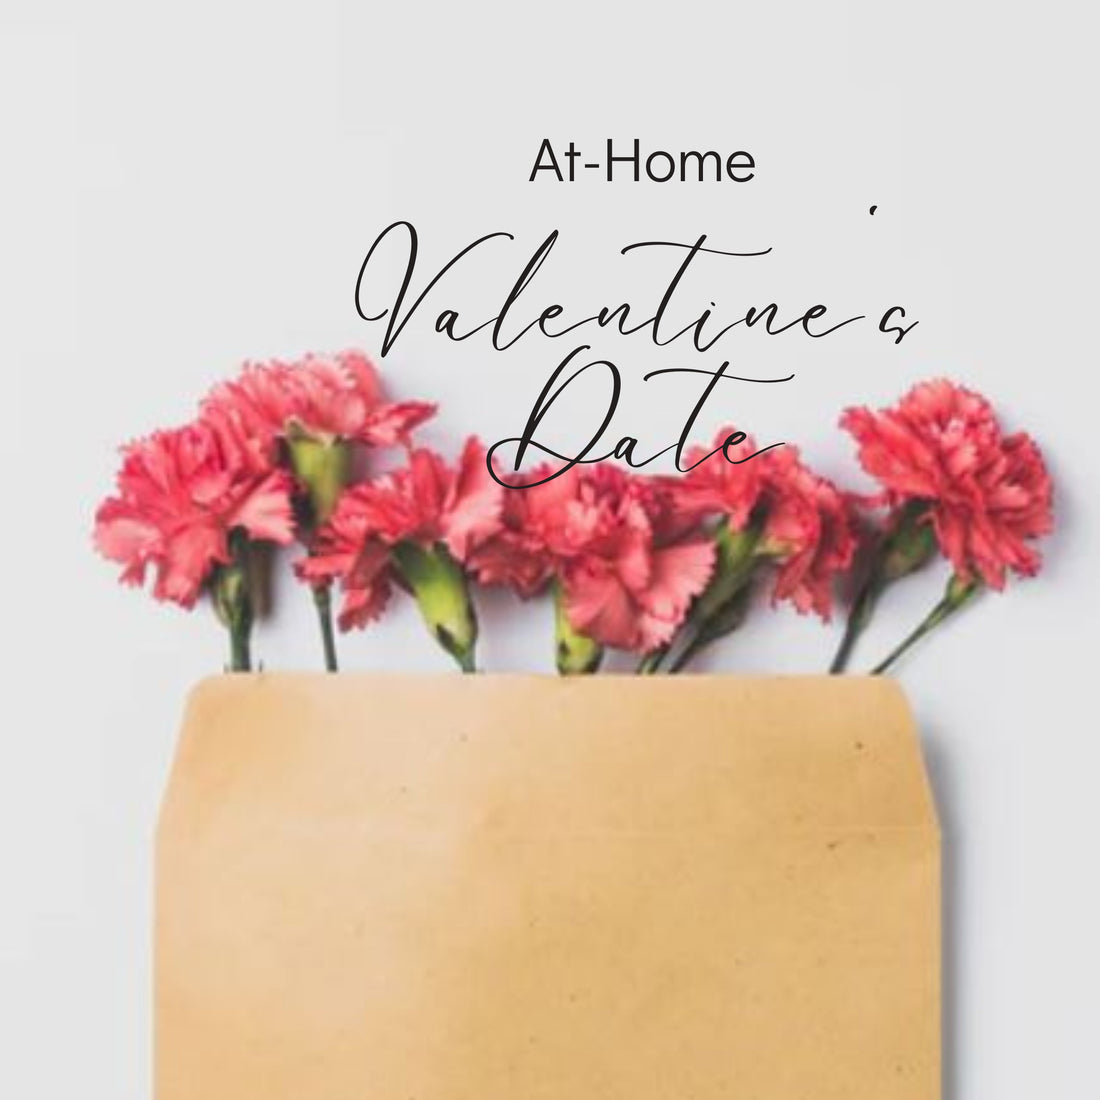 Top Must-Haves for the Perfect At-Home Date This Valentine's